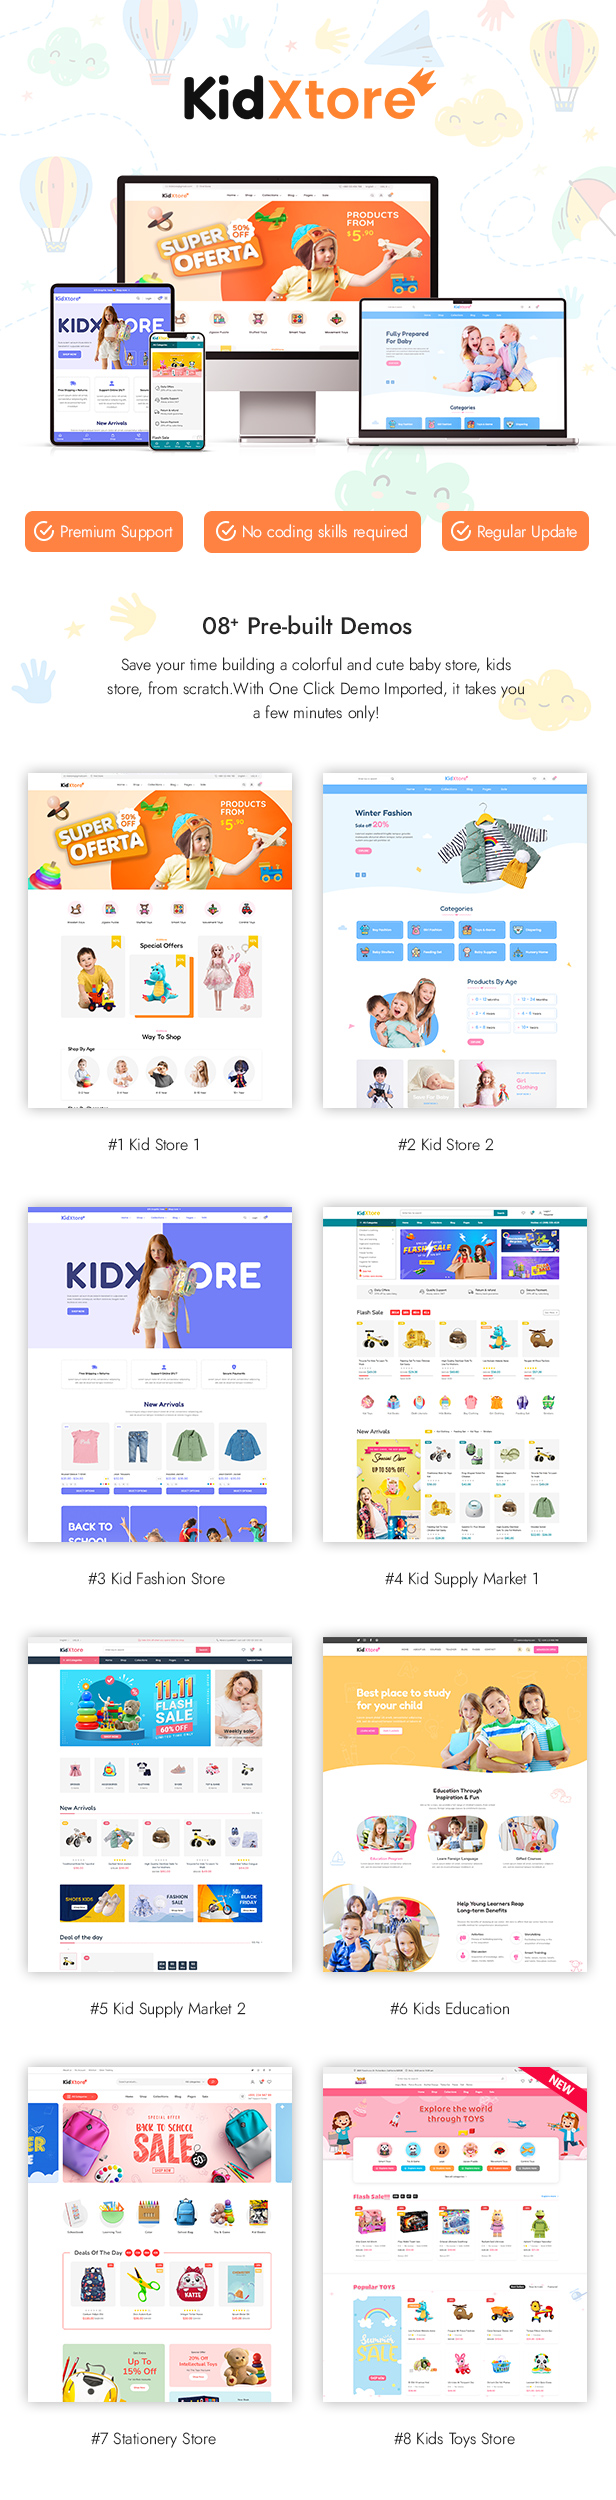 KidXtore - Baby Shop and Kids Store WooCommerce Theme - 6